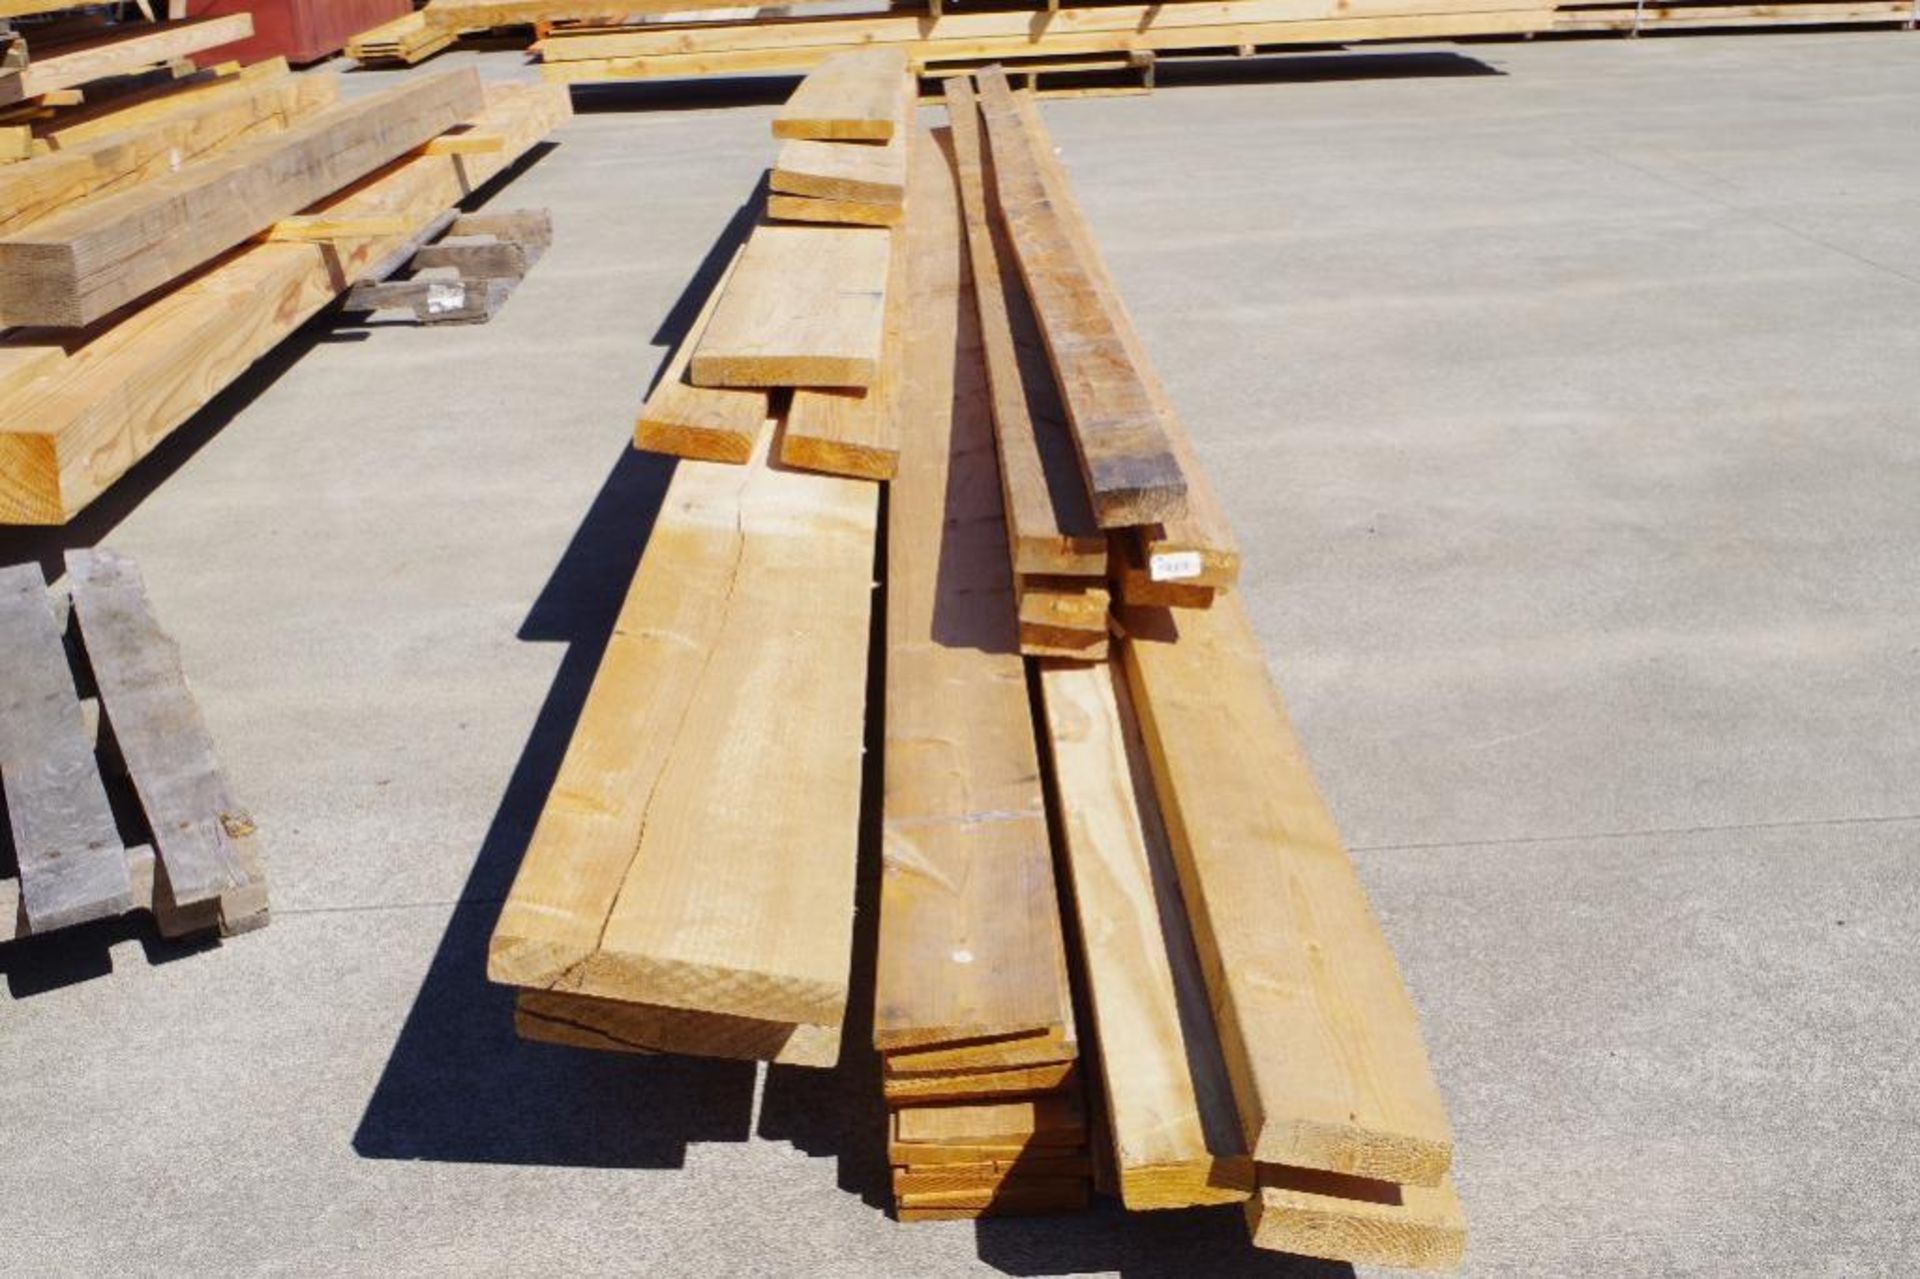 [QTY] Dimensional Lumber: 2x10s, 2x6s, 2x4s; Includes (12) 6" x 16' Cedar Bevel Siding Boards - Image 2 of 4